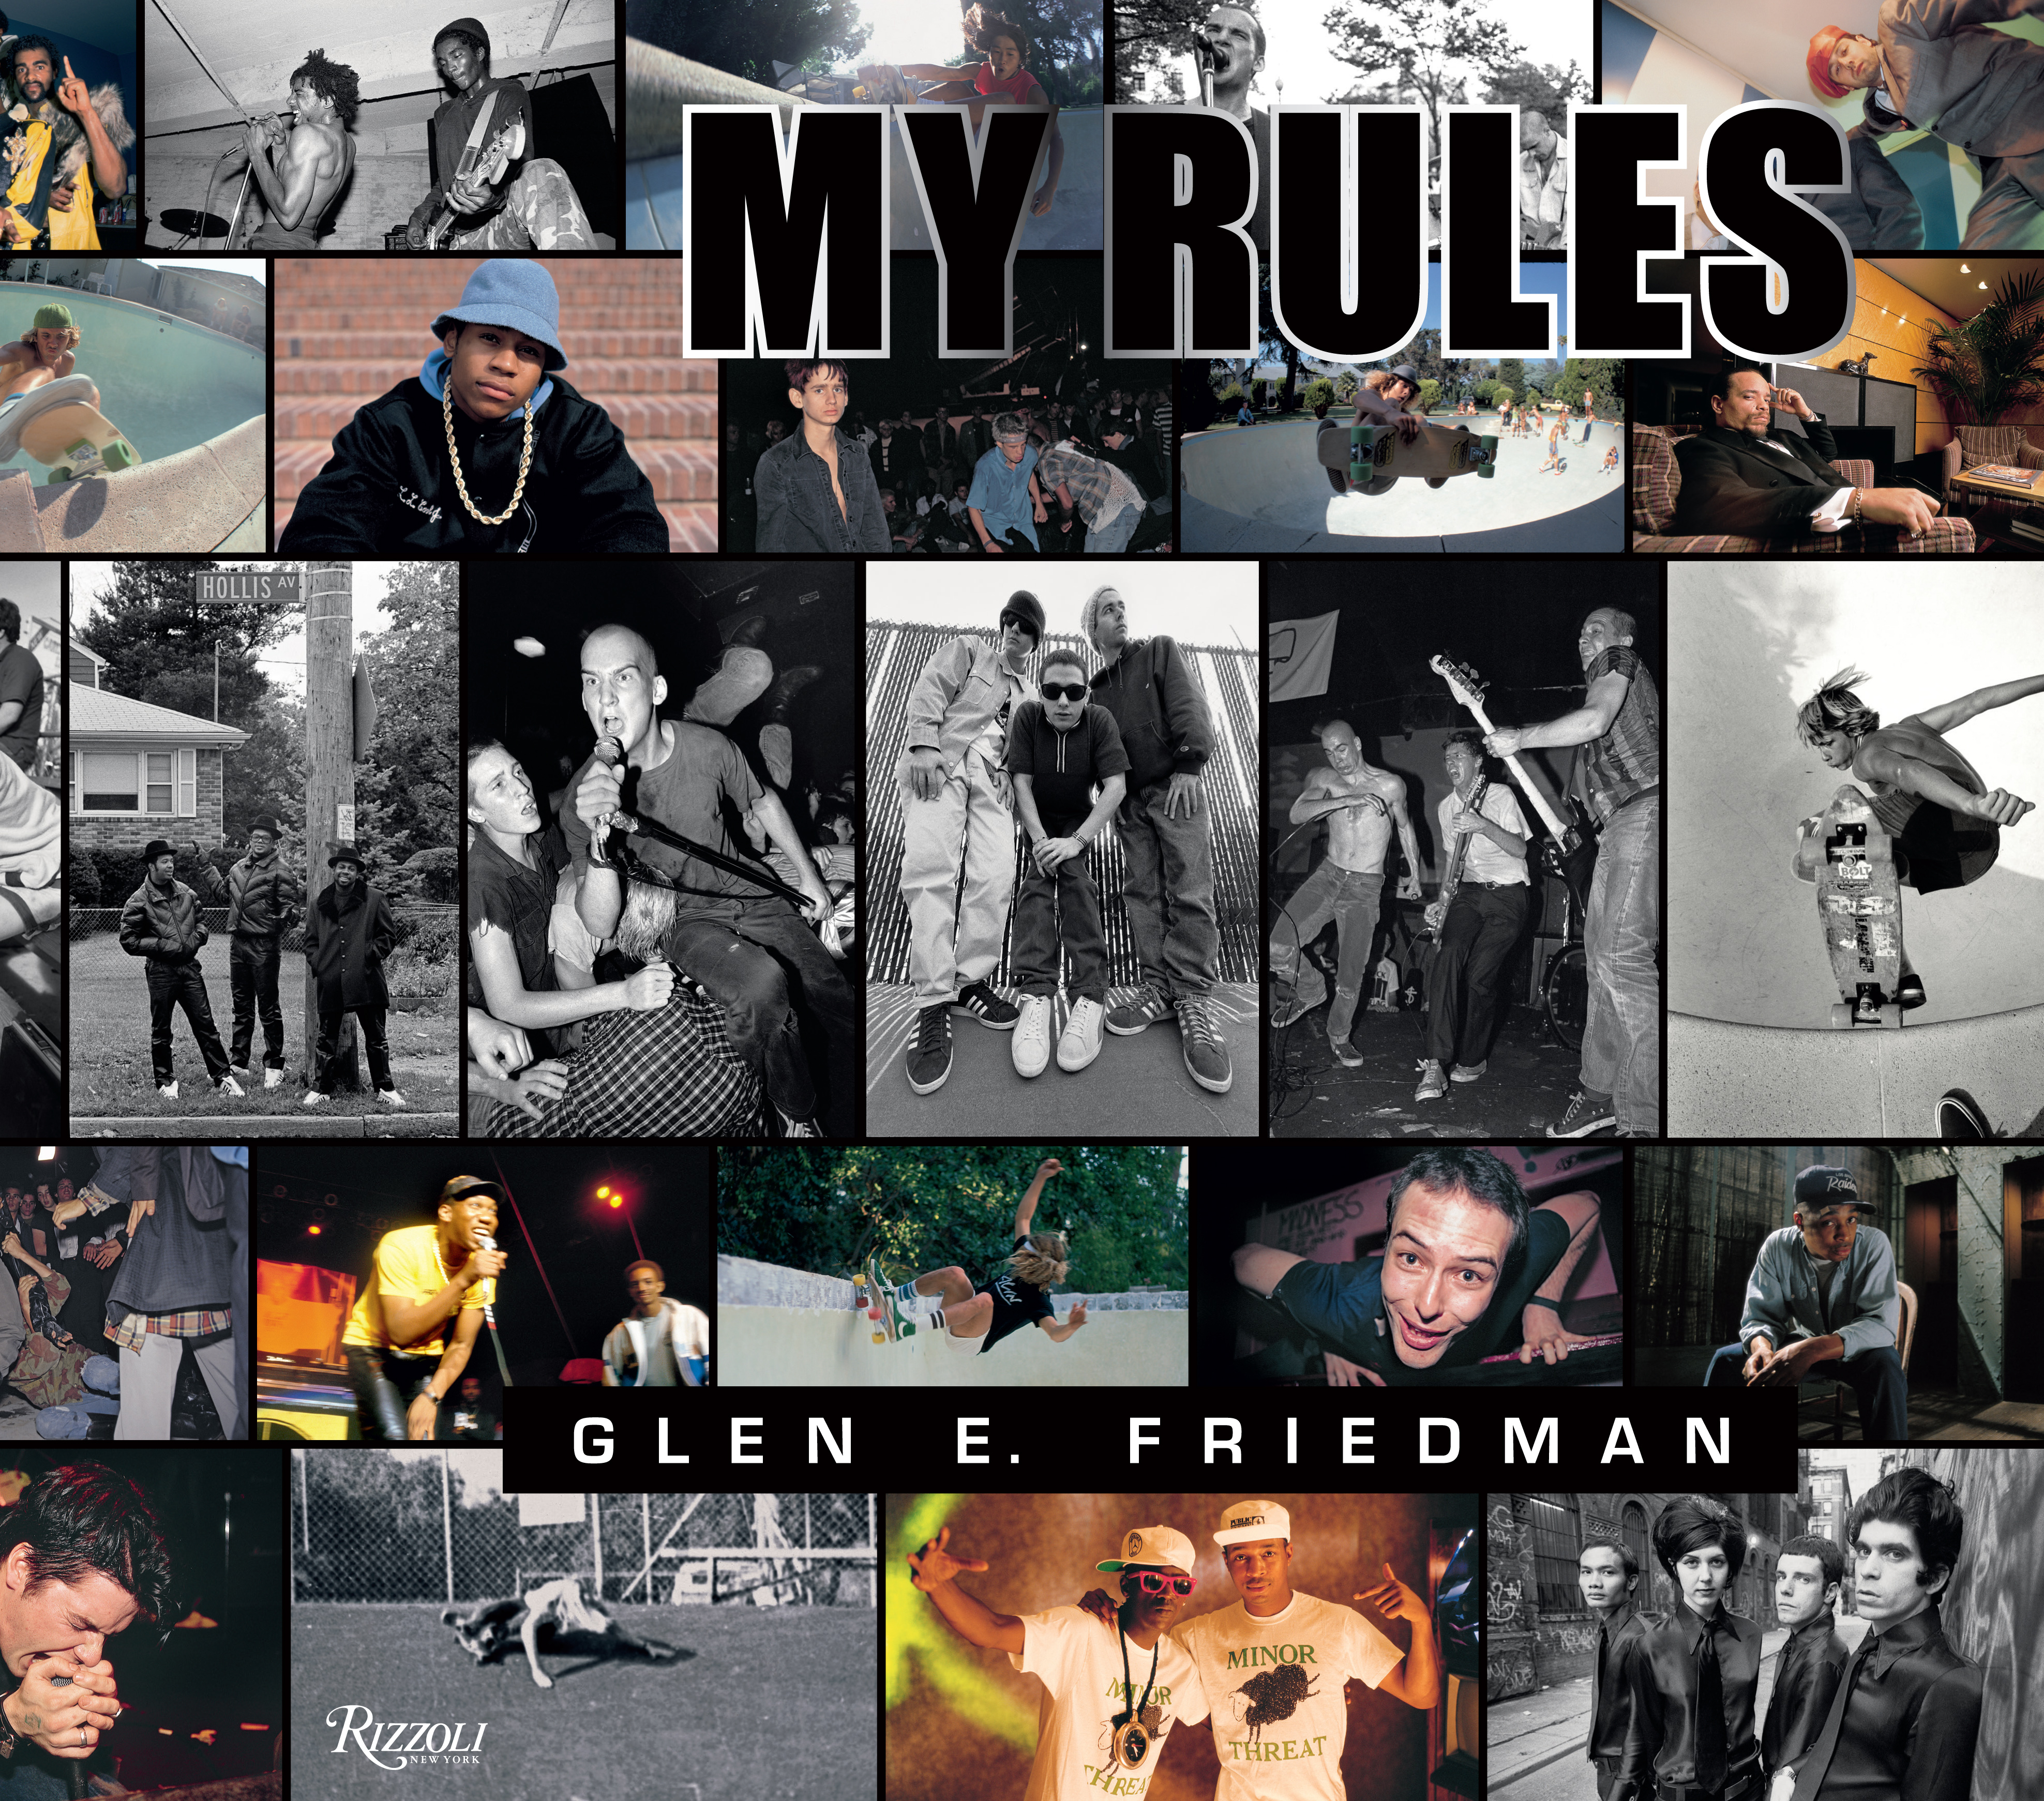 Book Launch: My Rules by Glen E. Friedman, with Ian Svenonius and special guests